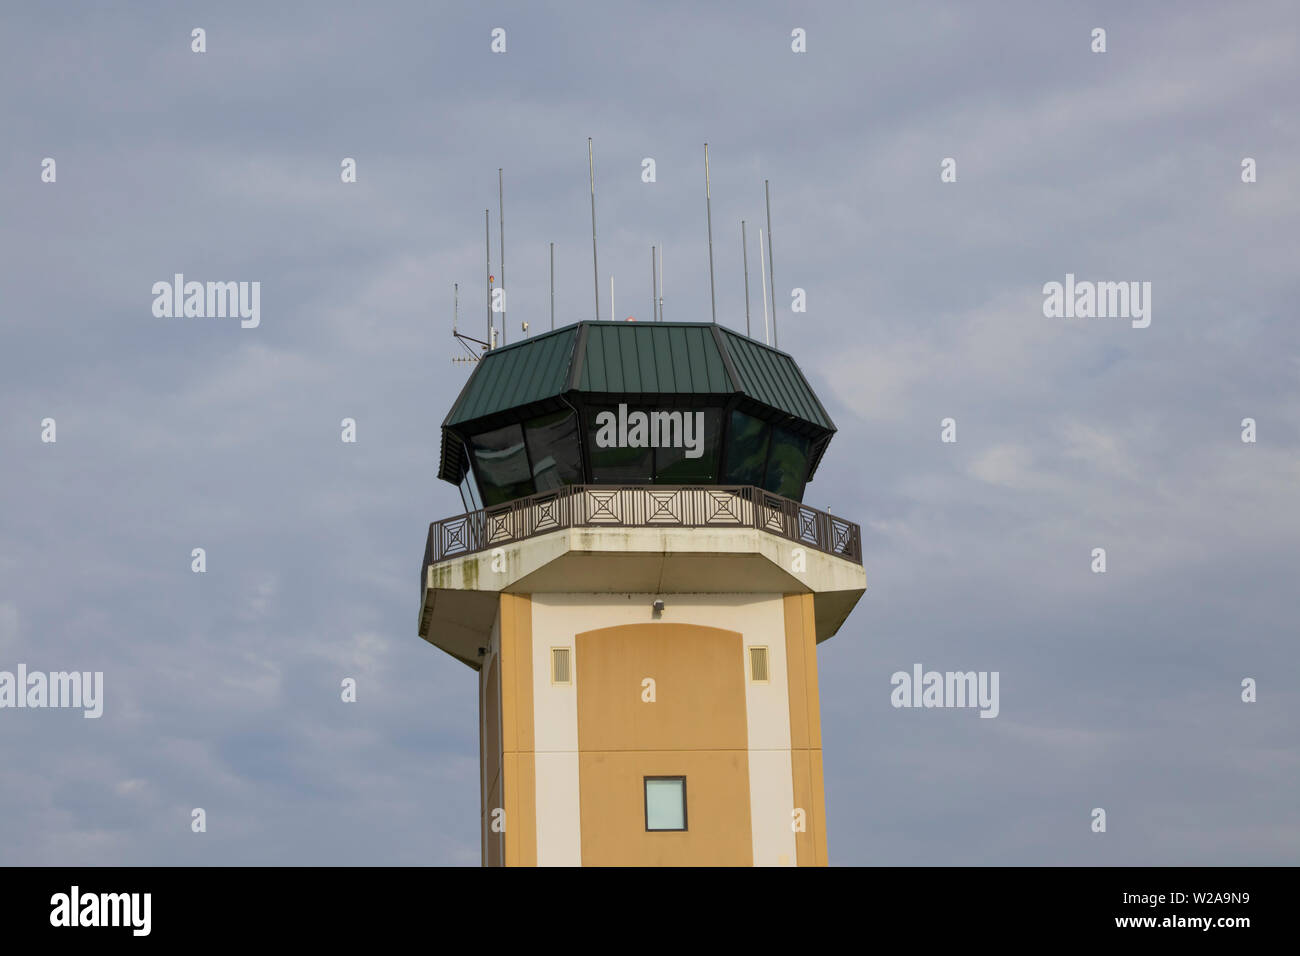 An air traffic control tower at an airport Stock Photo